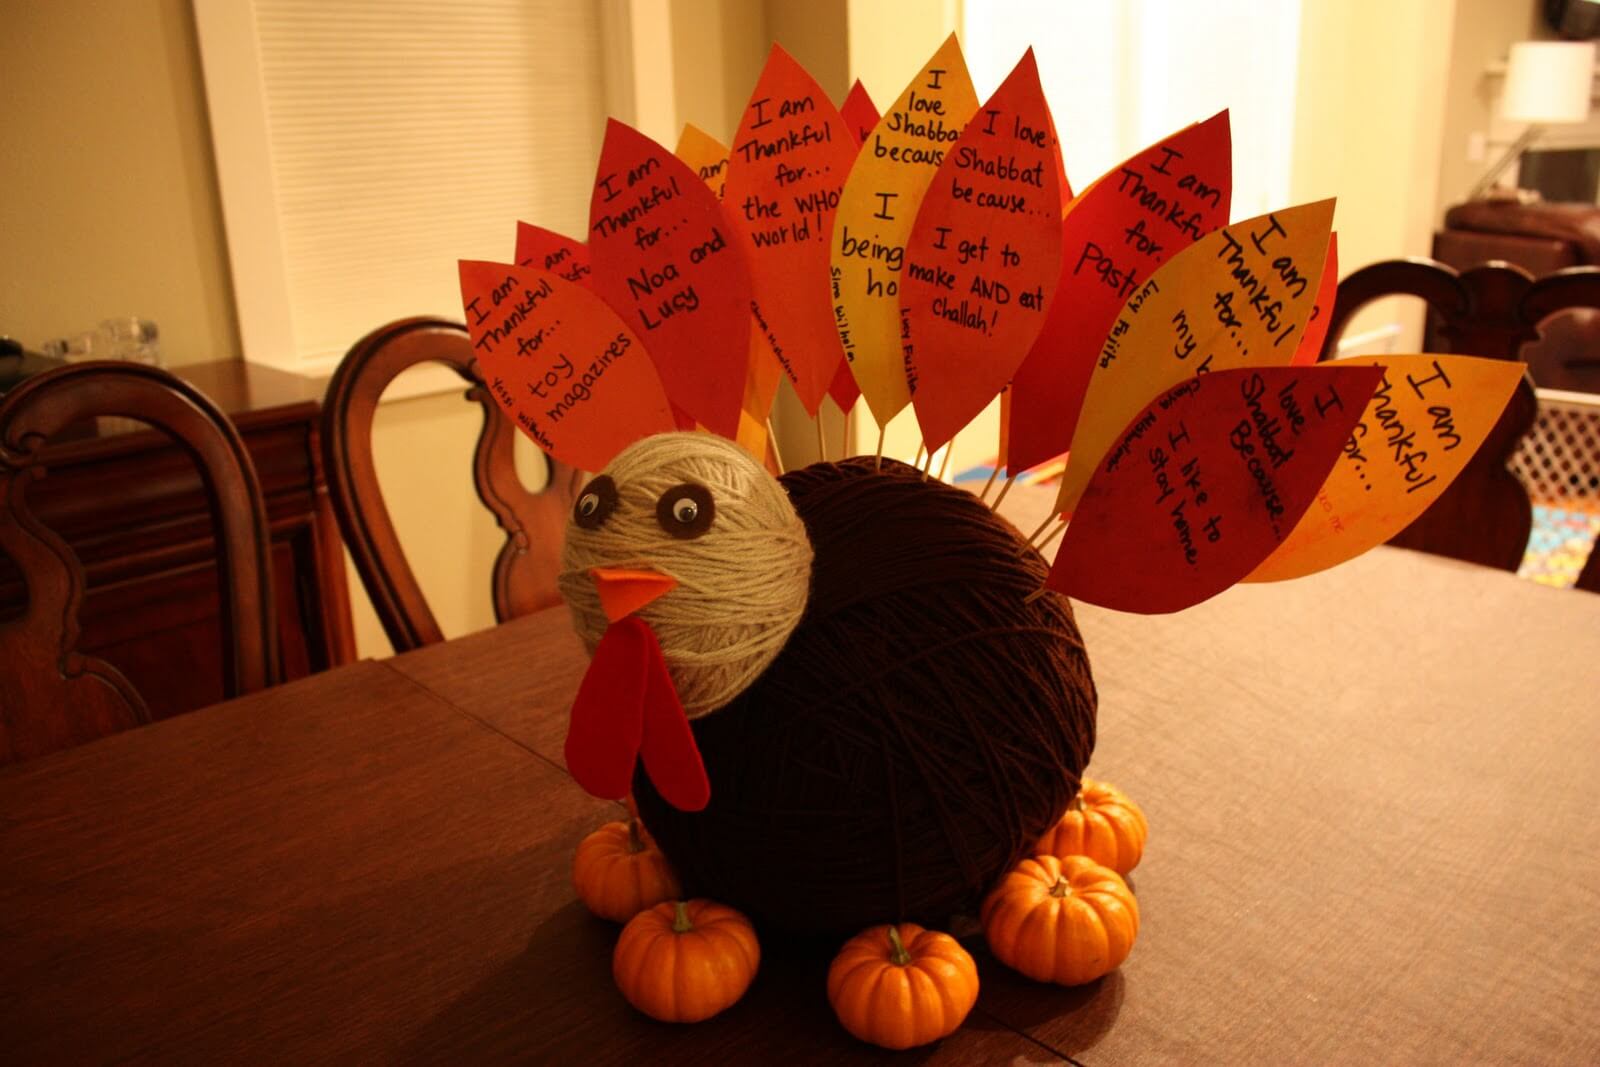 diy thanks giving decorations